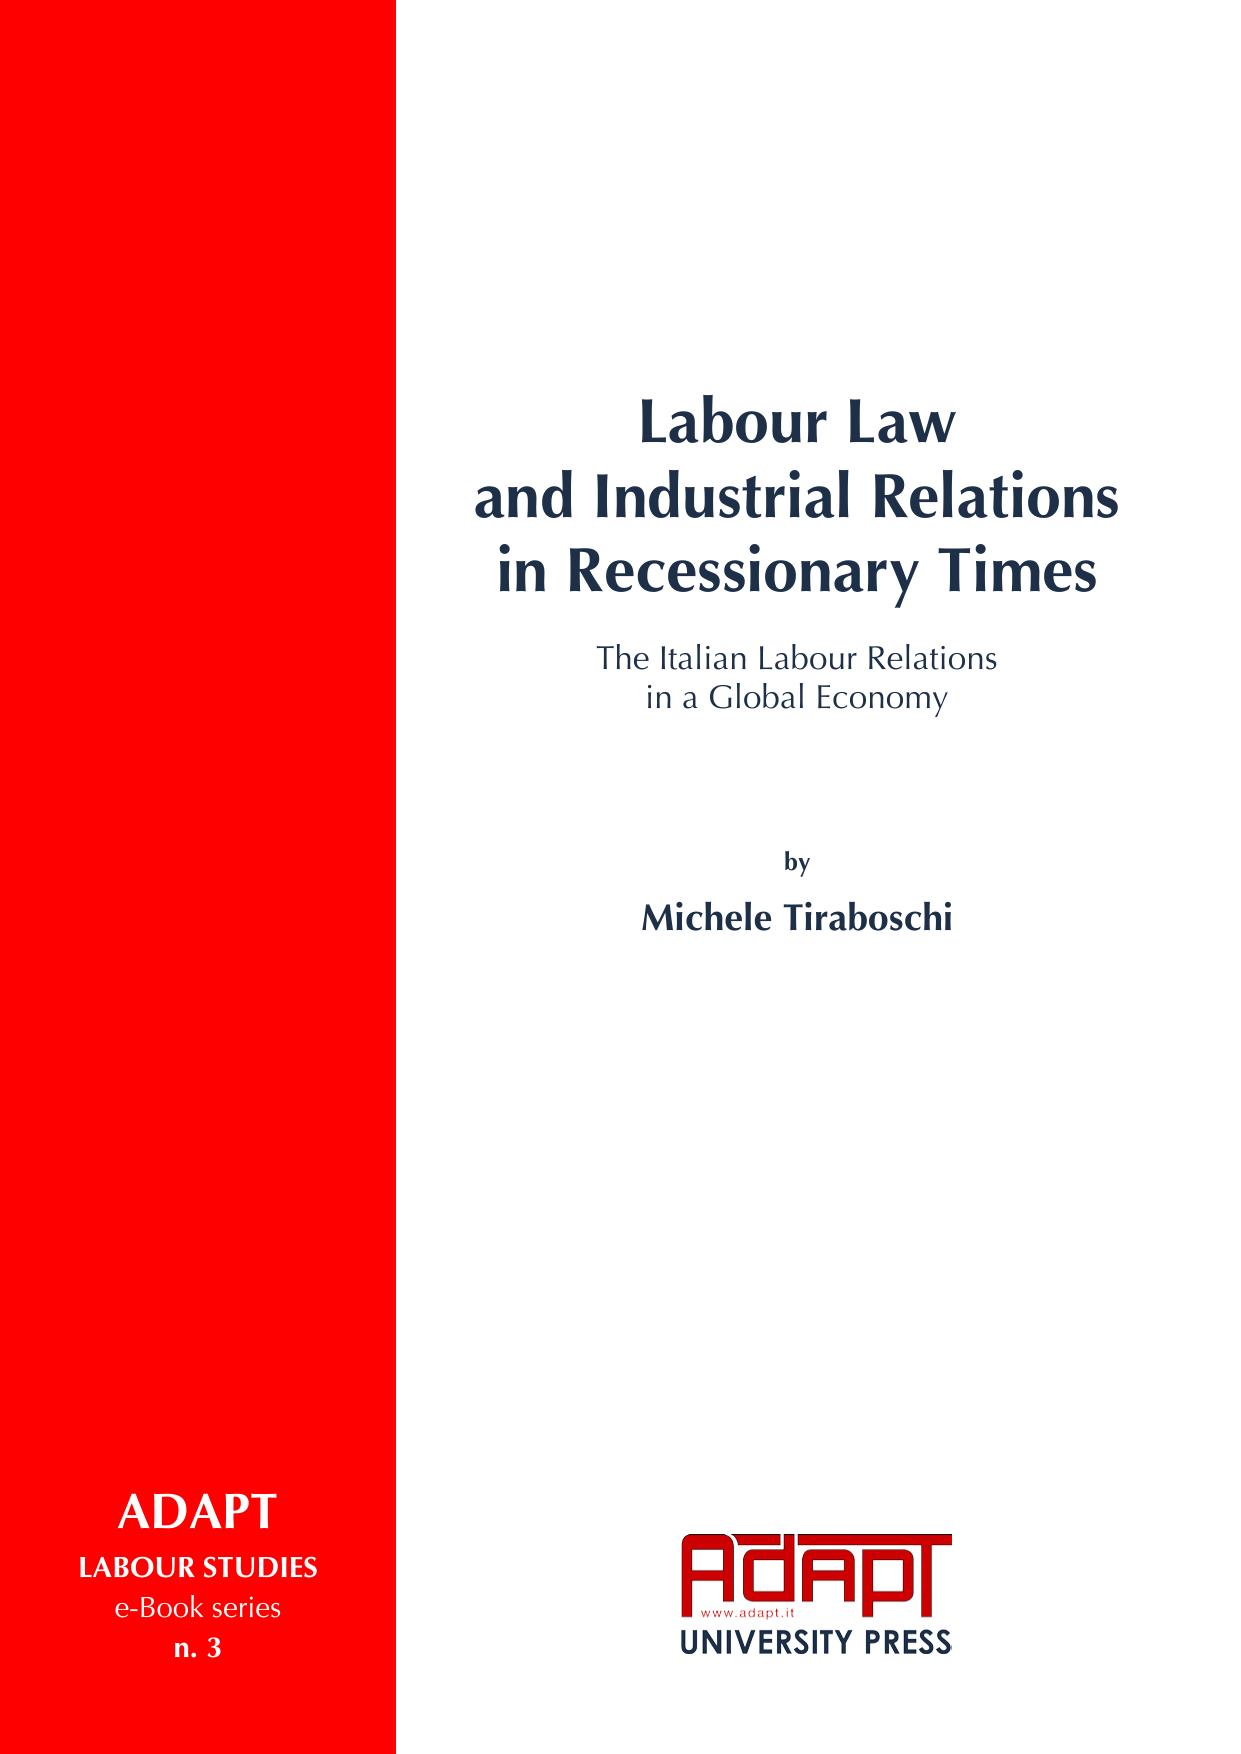 Labour Law and Industrial Relations 2012